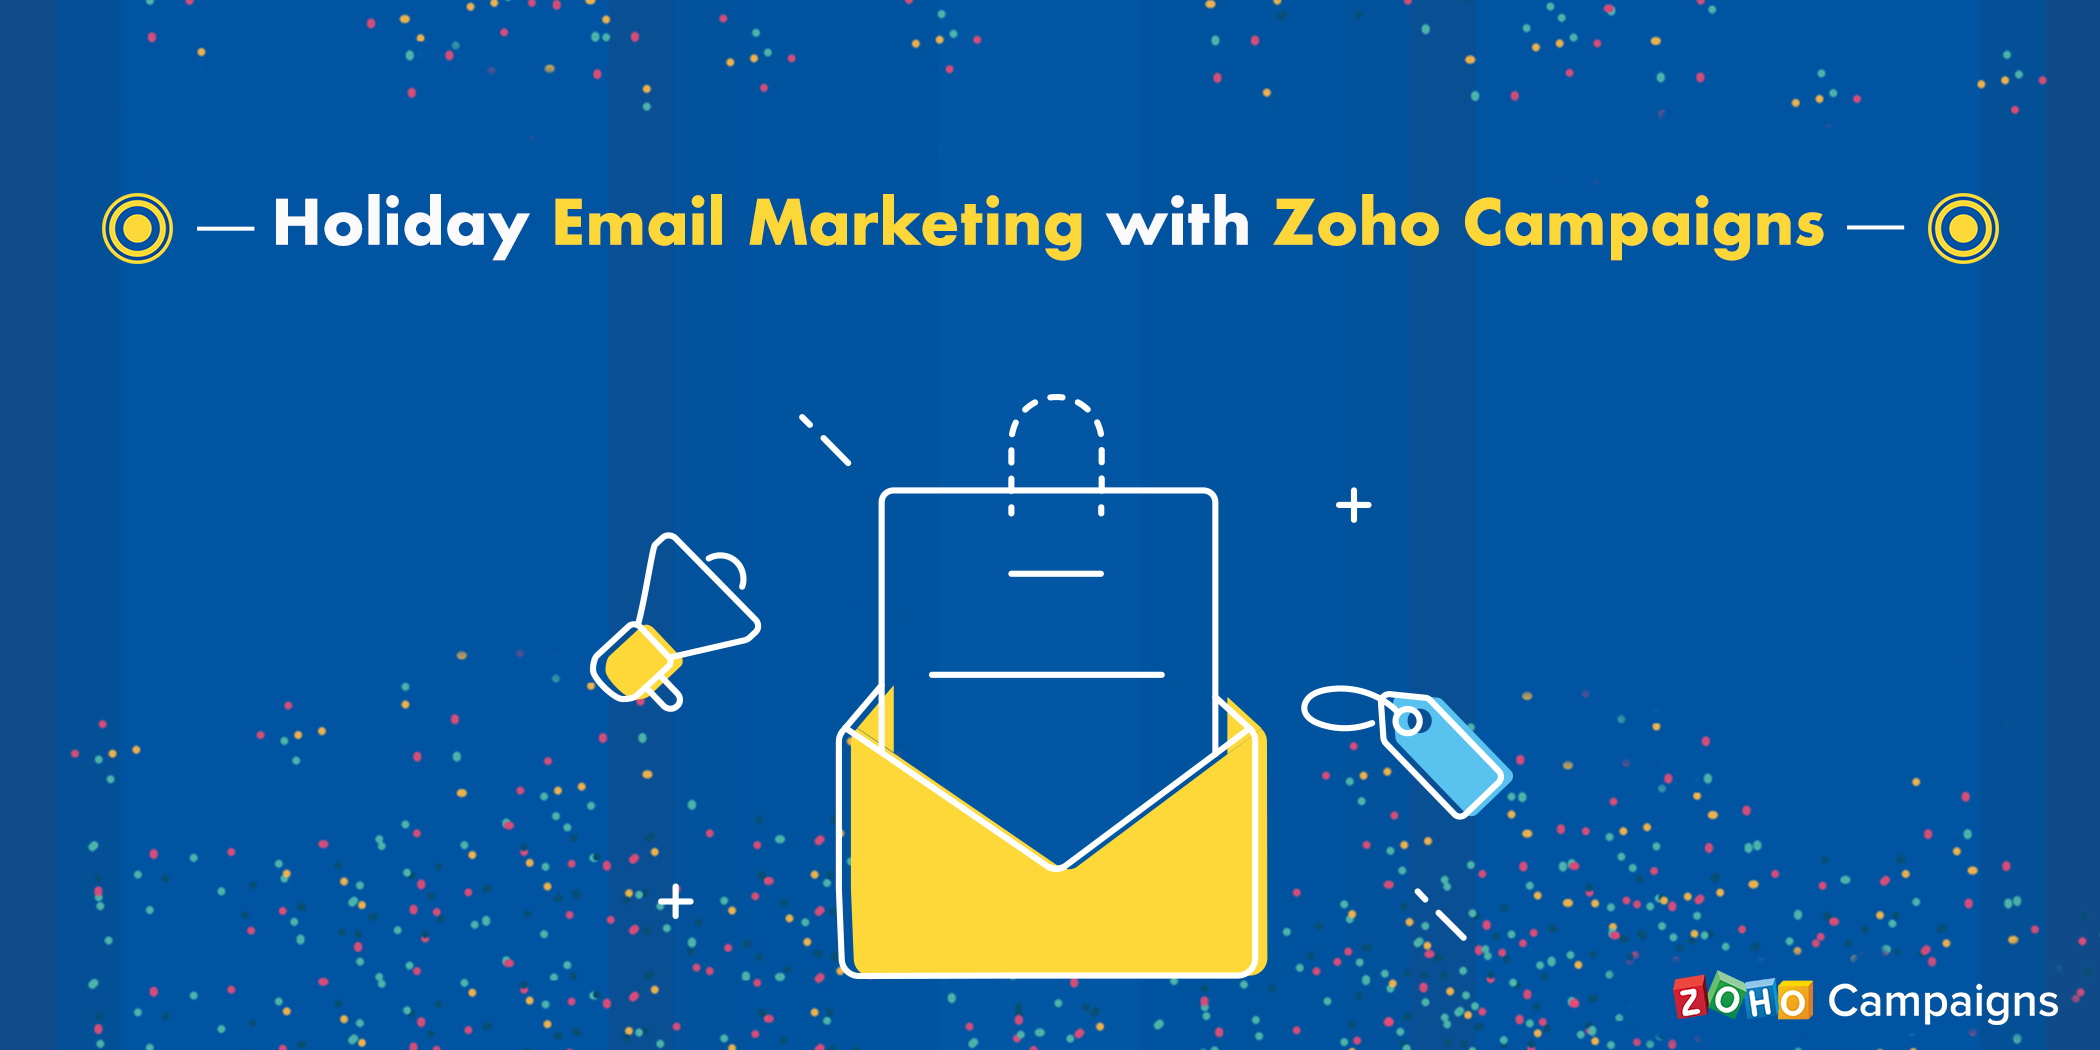 Holiday email marketing with Zoho Campaigns